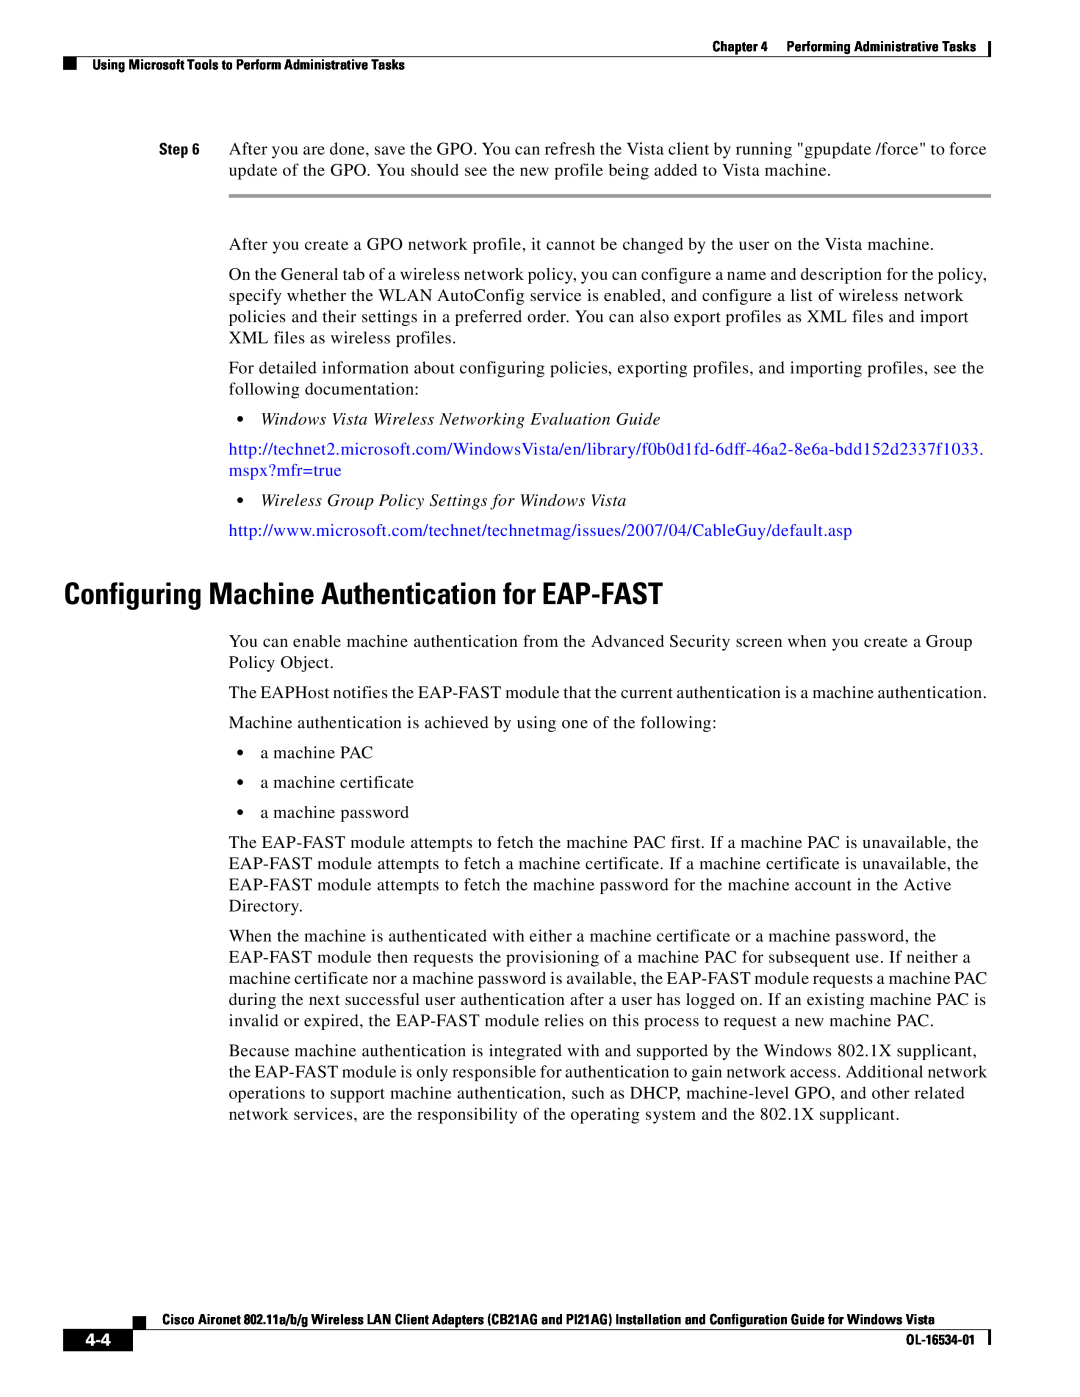 Cisco Systems PI21AG, CB21AG manual Configuring Machine Authentication for EAP-FAST 